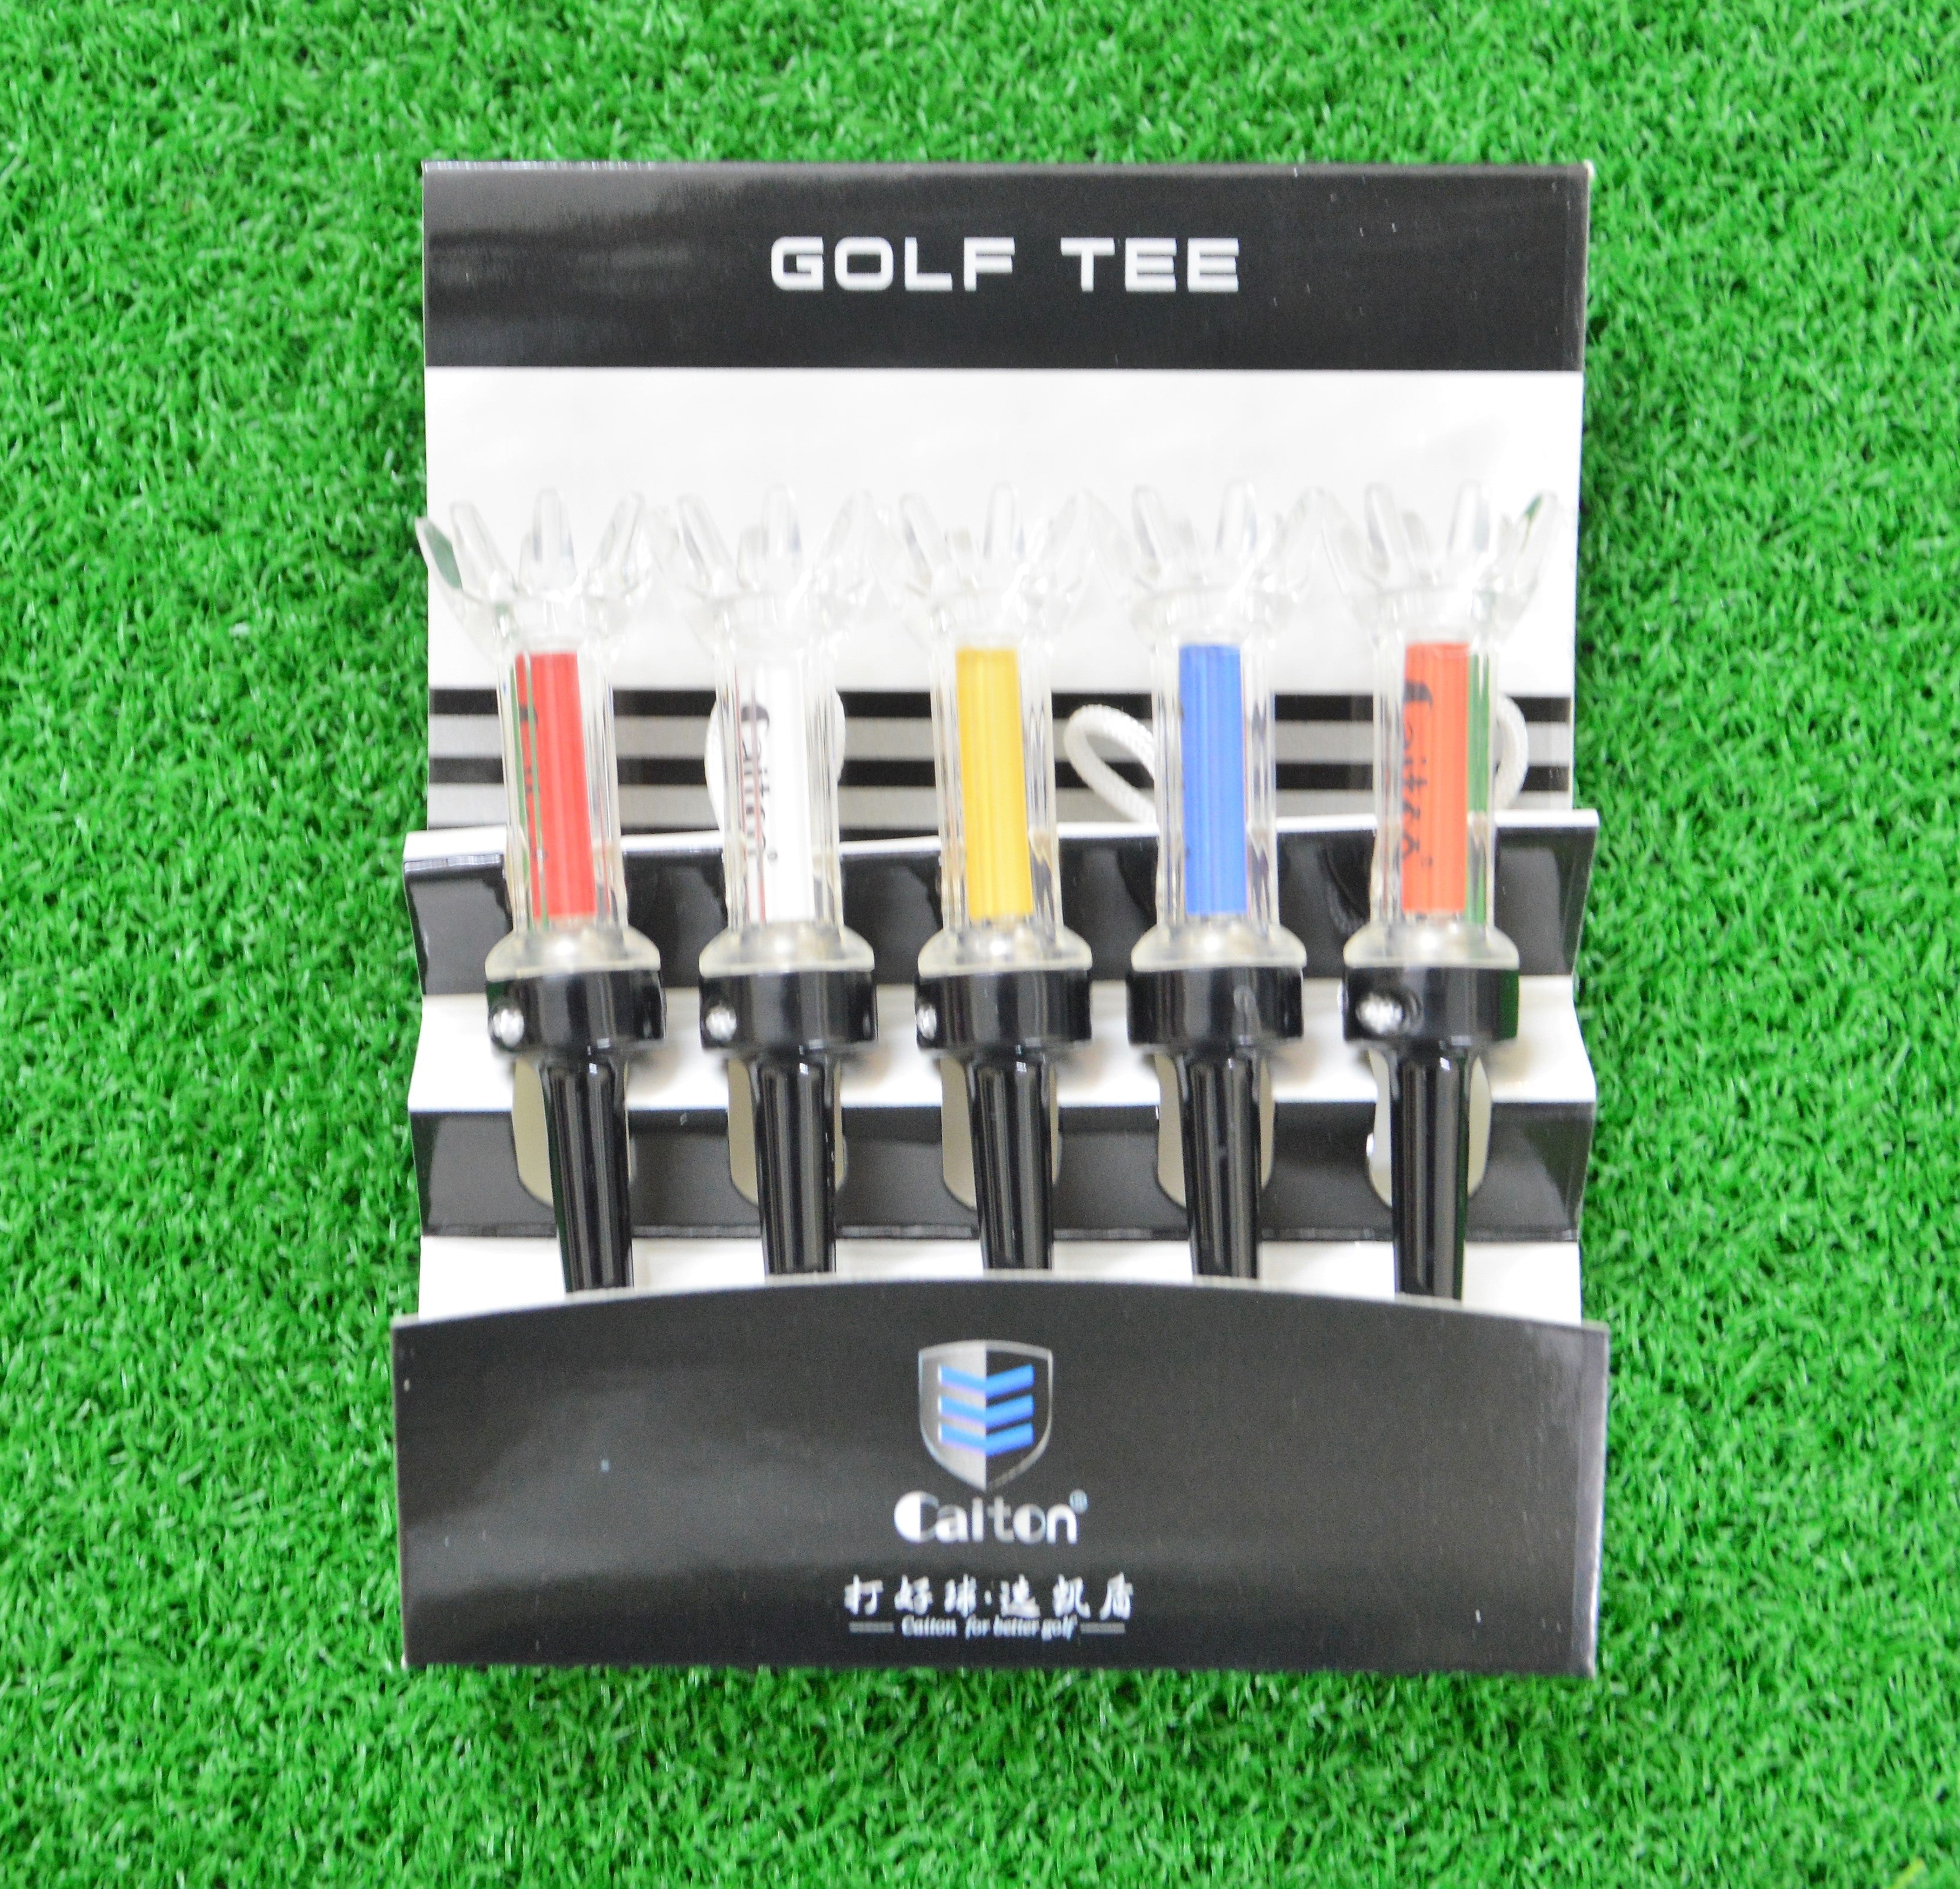 Caiton Magnetic Golf Tees (2 sizes)